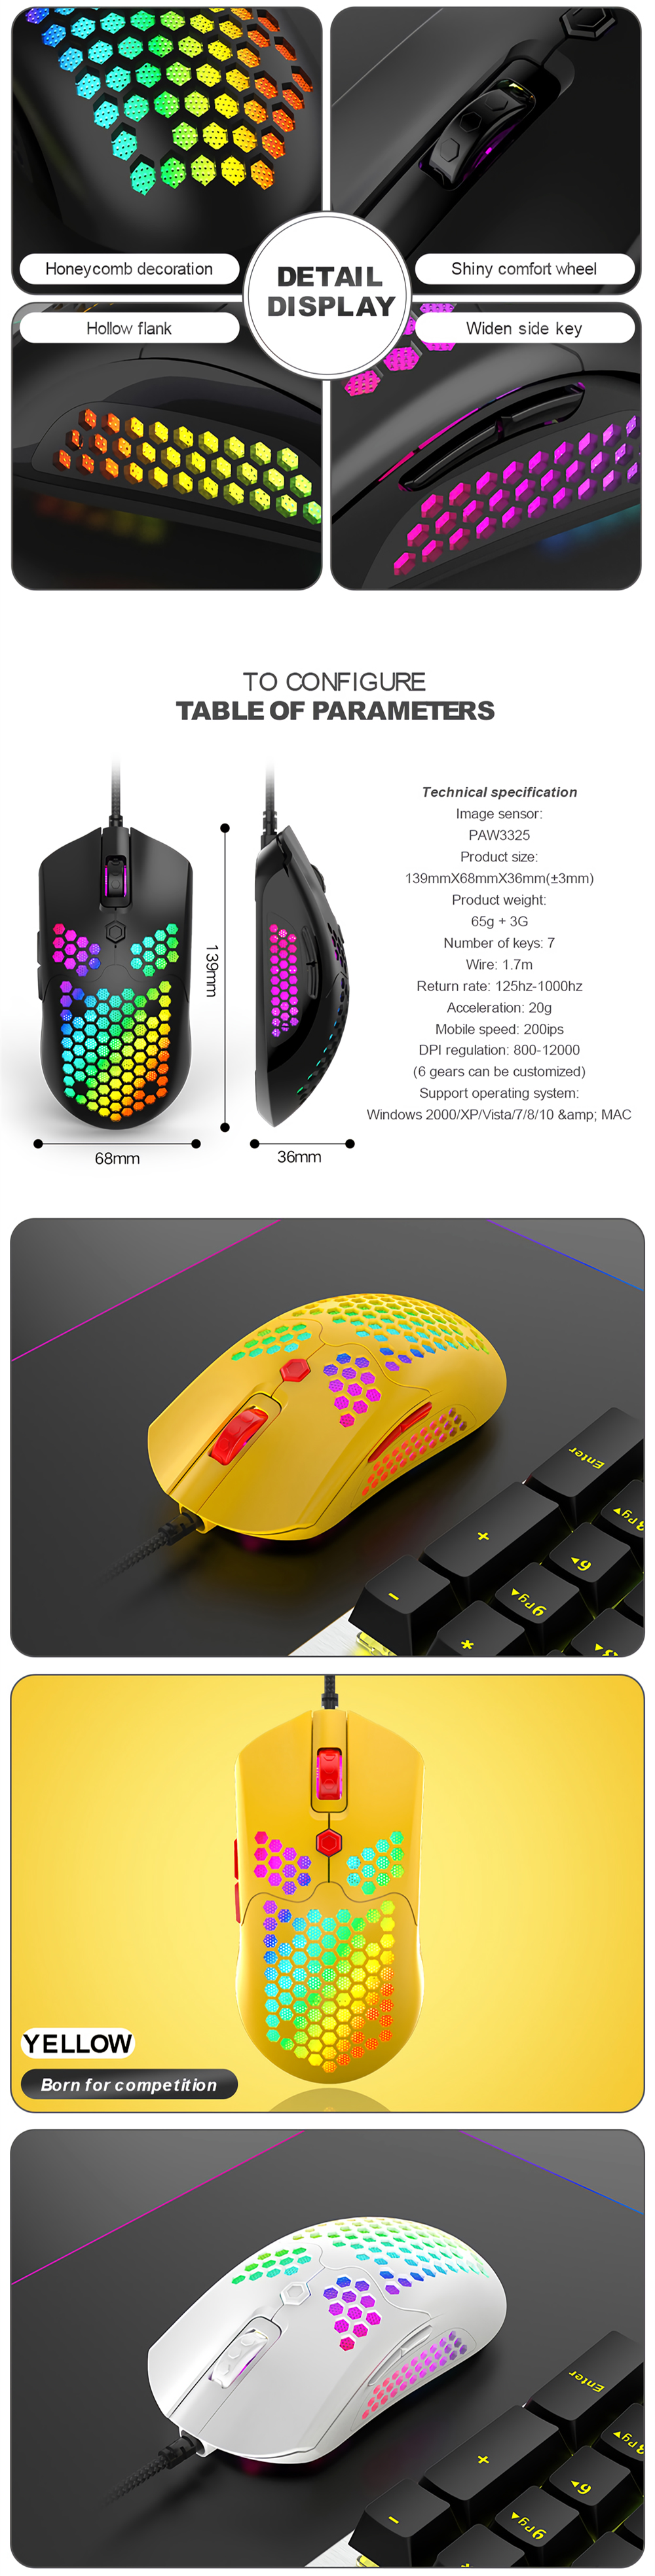 Free-wolf M5 Wired Game Mouse Breathing RGB Colorful Hollow Honeycomb Shape 12000DPI Gaming Mouse USB Wired Gamer Mice for Desktop Computer Laptop PC 16